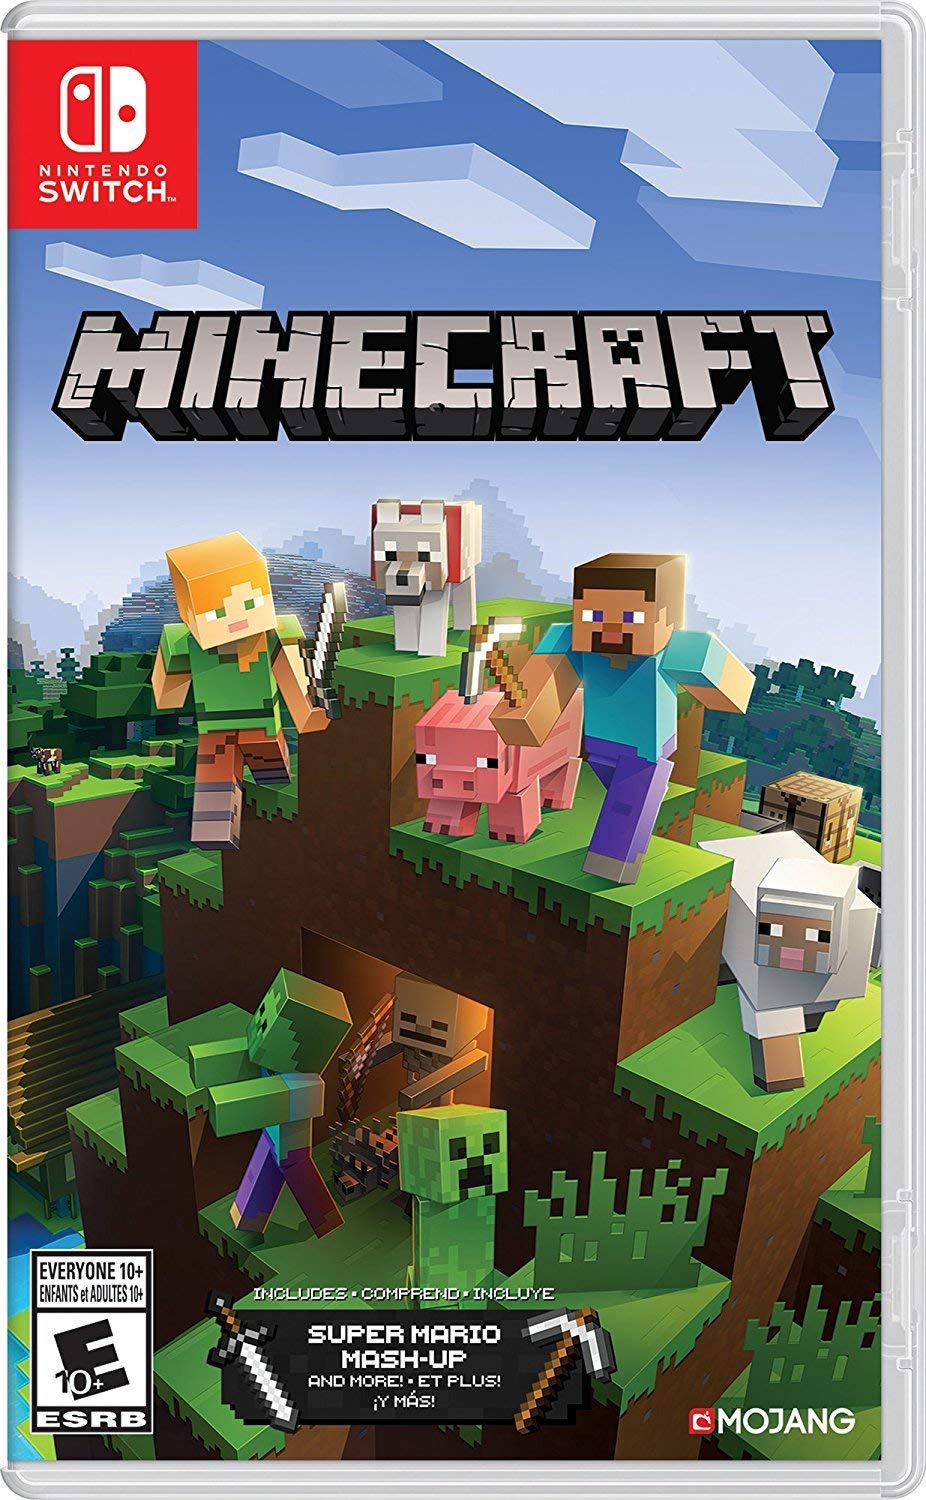 Can I play Minecraft on the Nintendo Switch Lite?